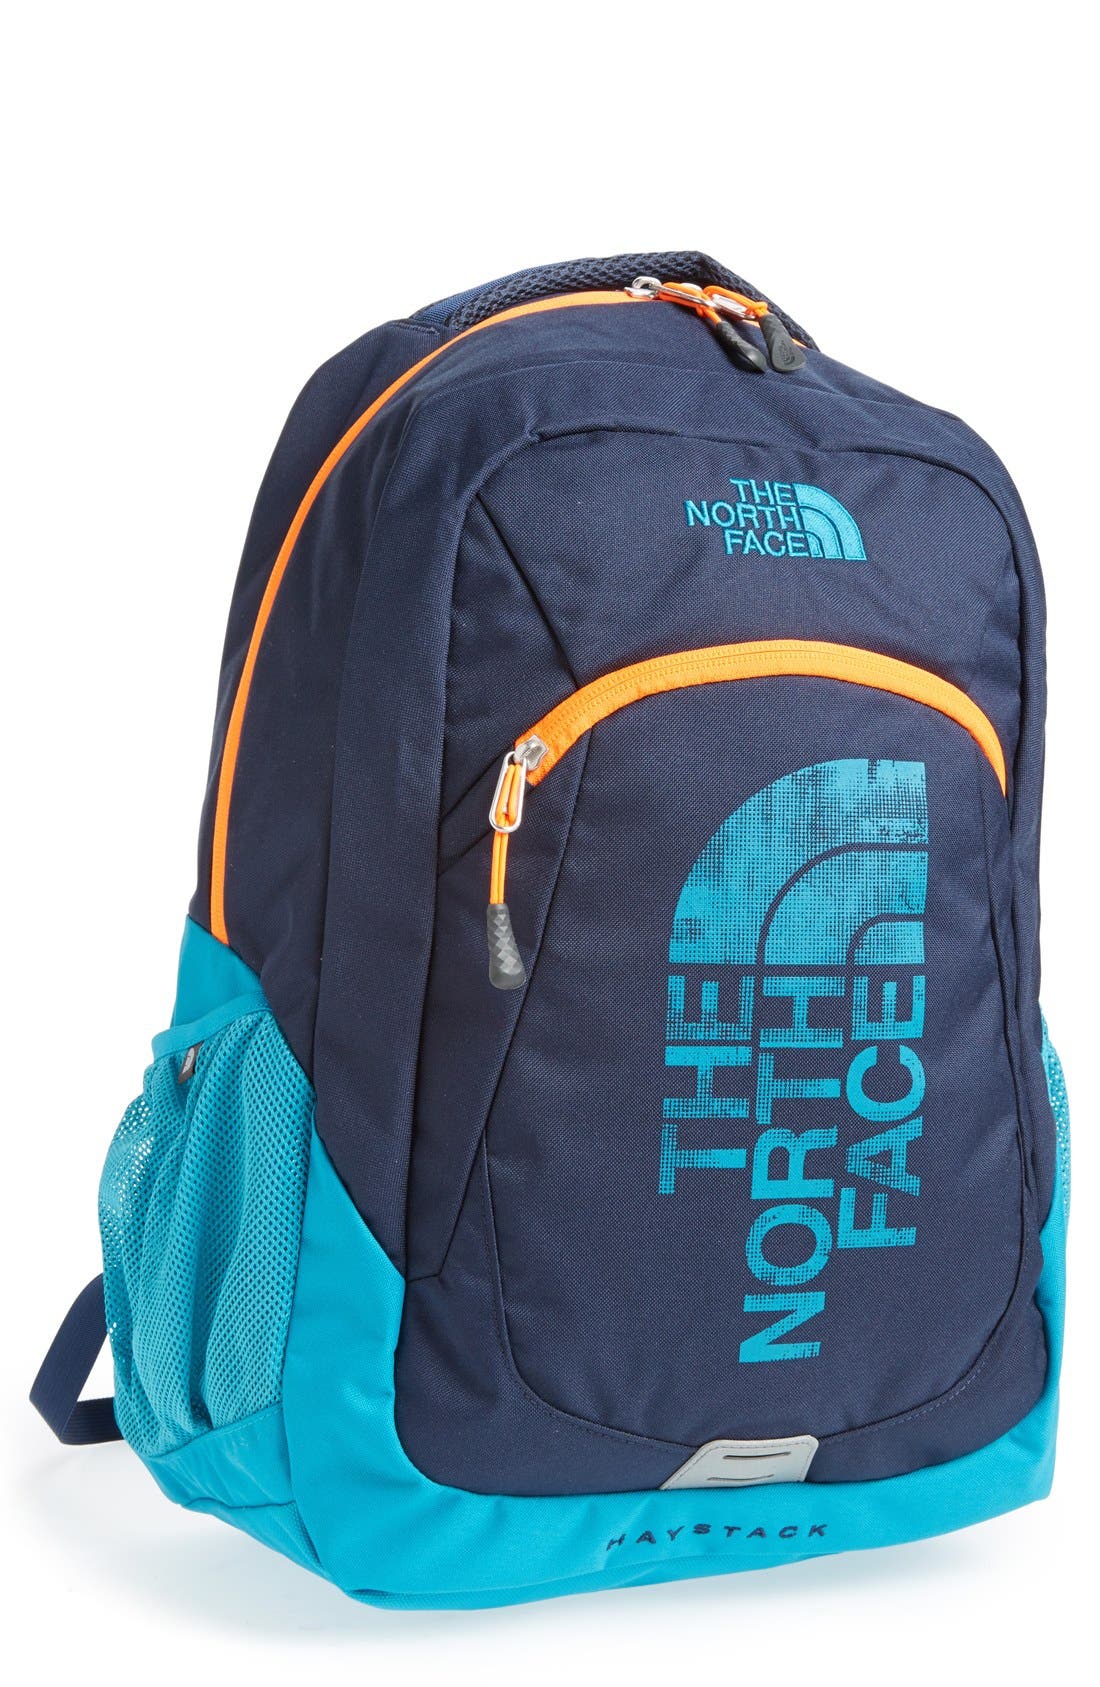 The North Face 'Haystack' Backpack 